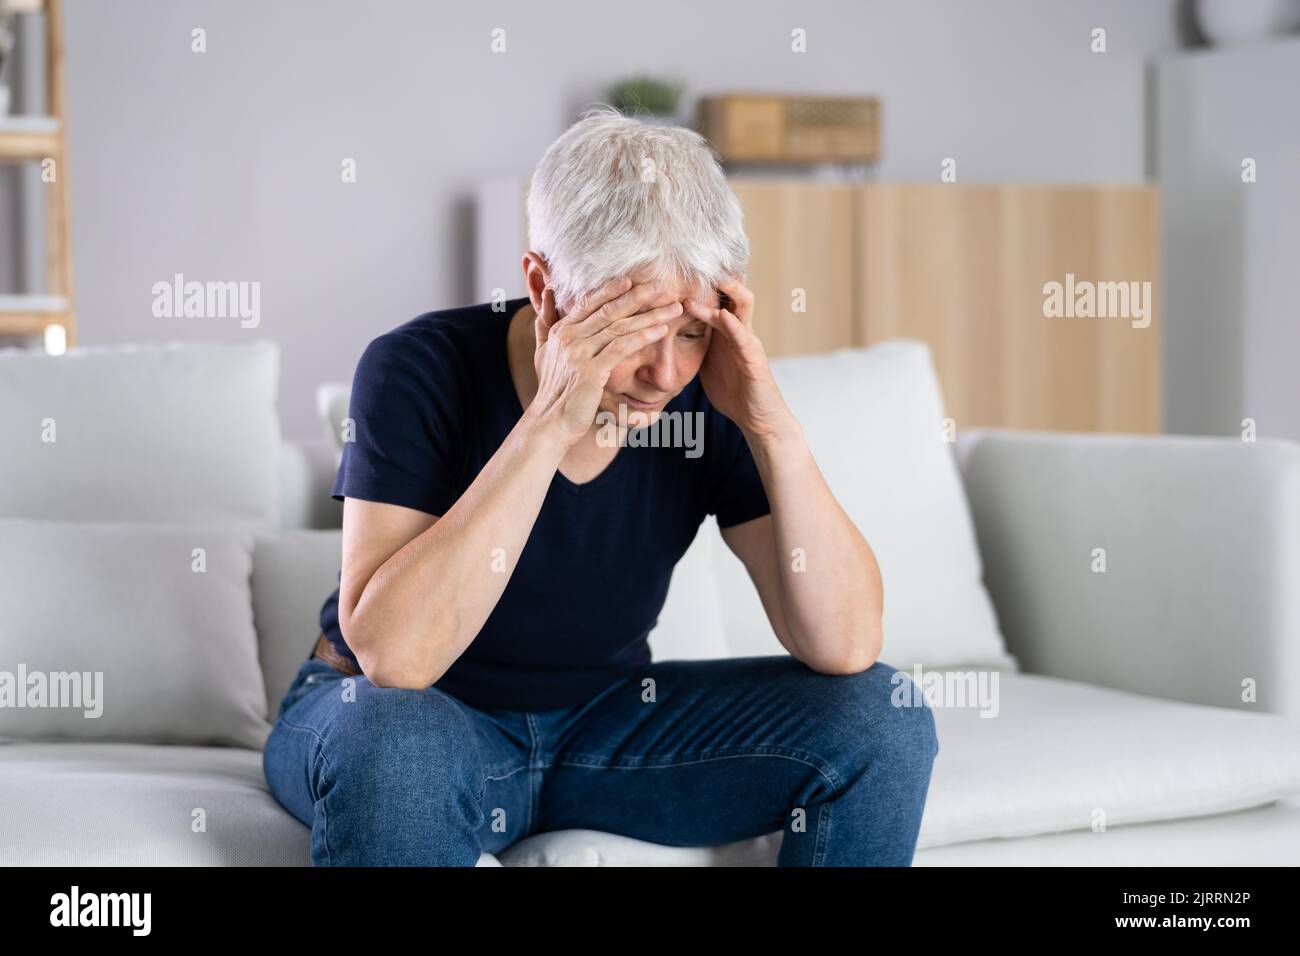 Worried Woman With Mental Stress. Sad Bored Elder person Stock Photo